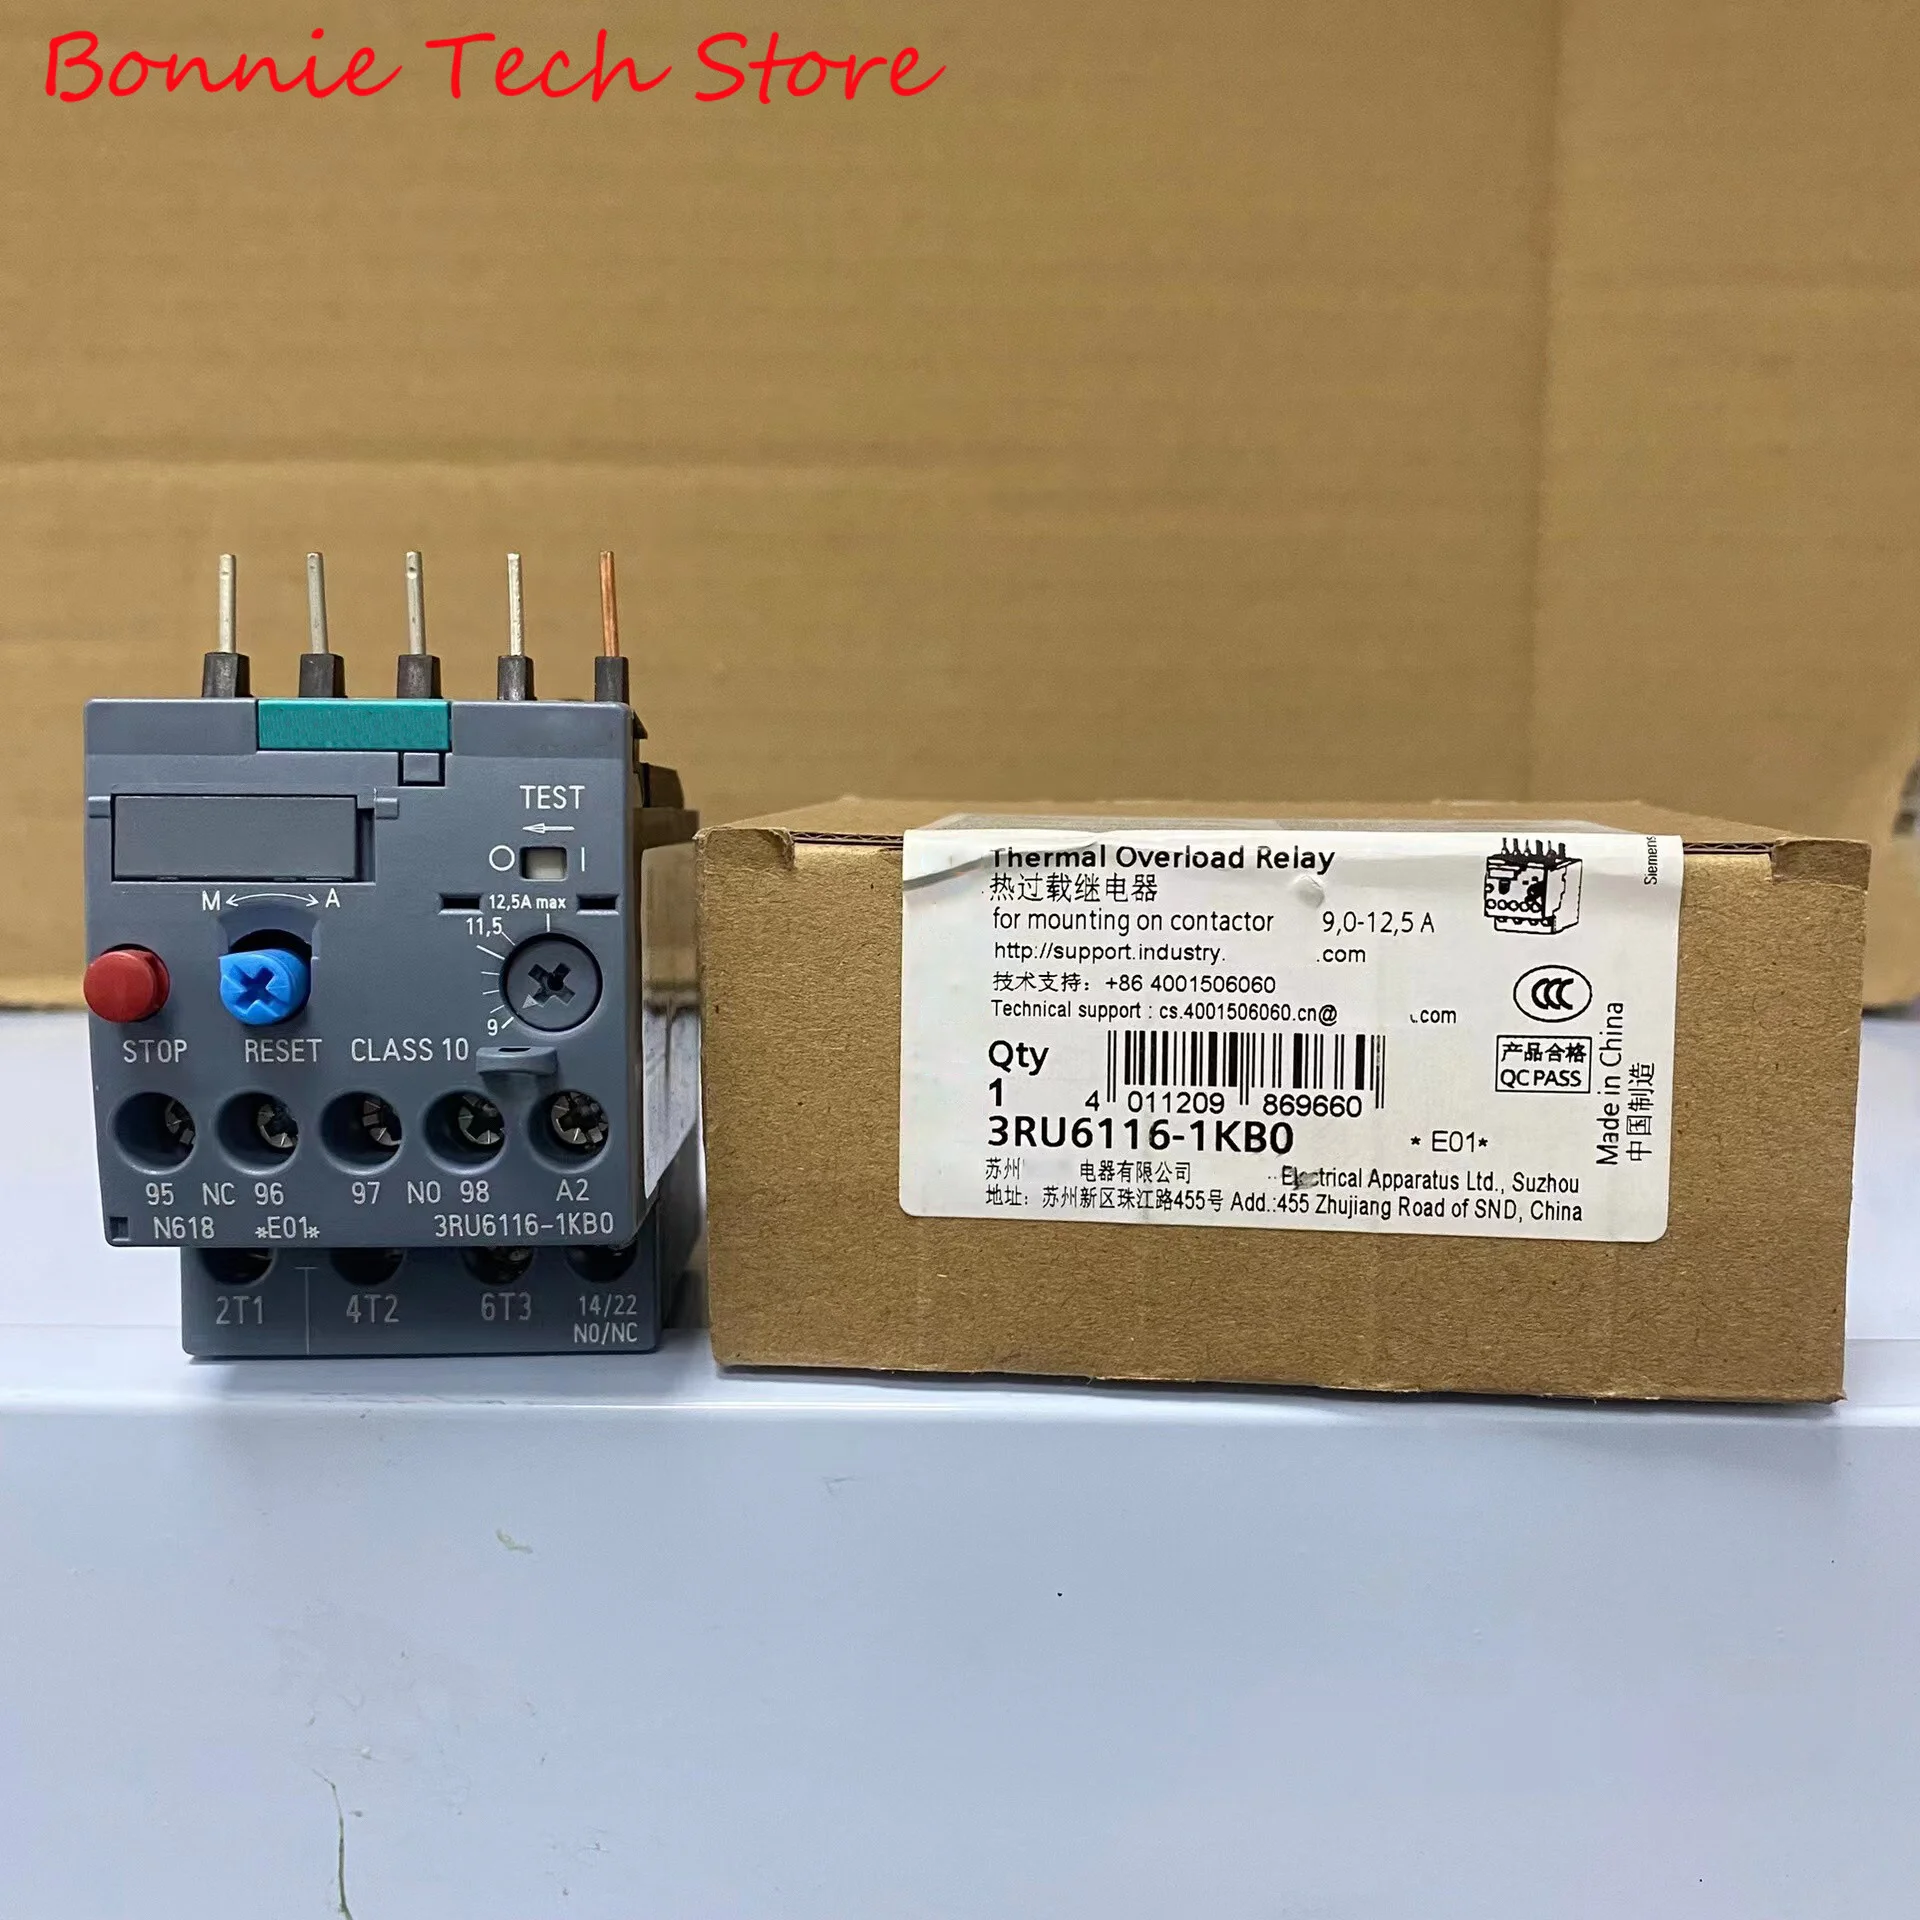 

3RU6116-1KB0 for Siemens Thermal Overload Relay 9.0...12.5 A size S00, class 10, for motor protection